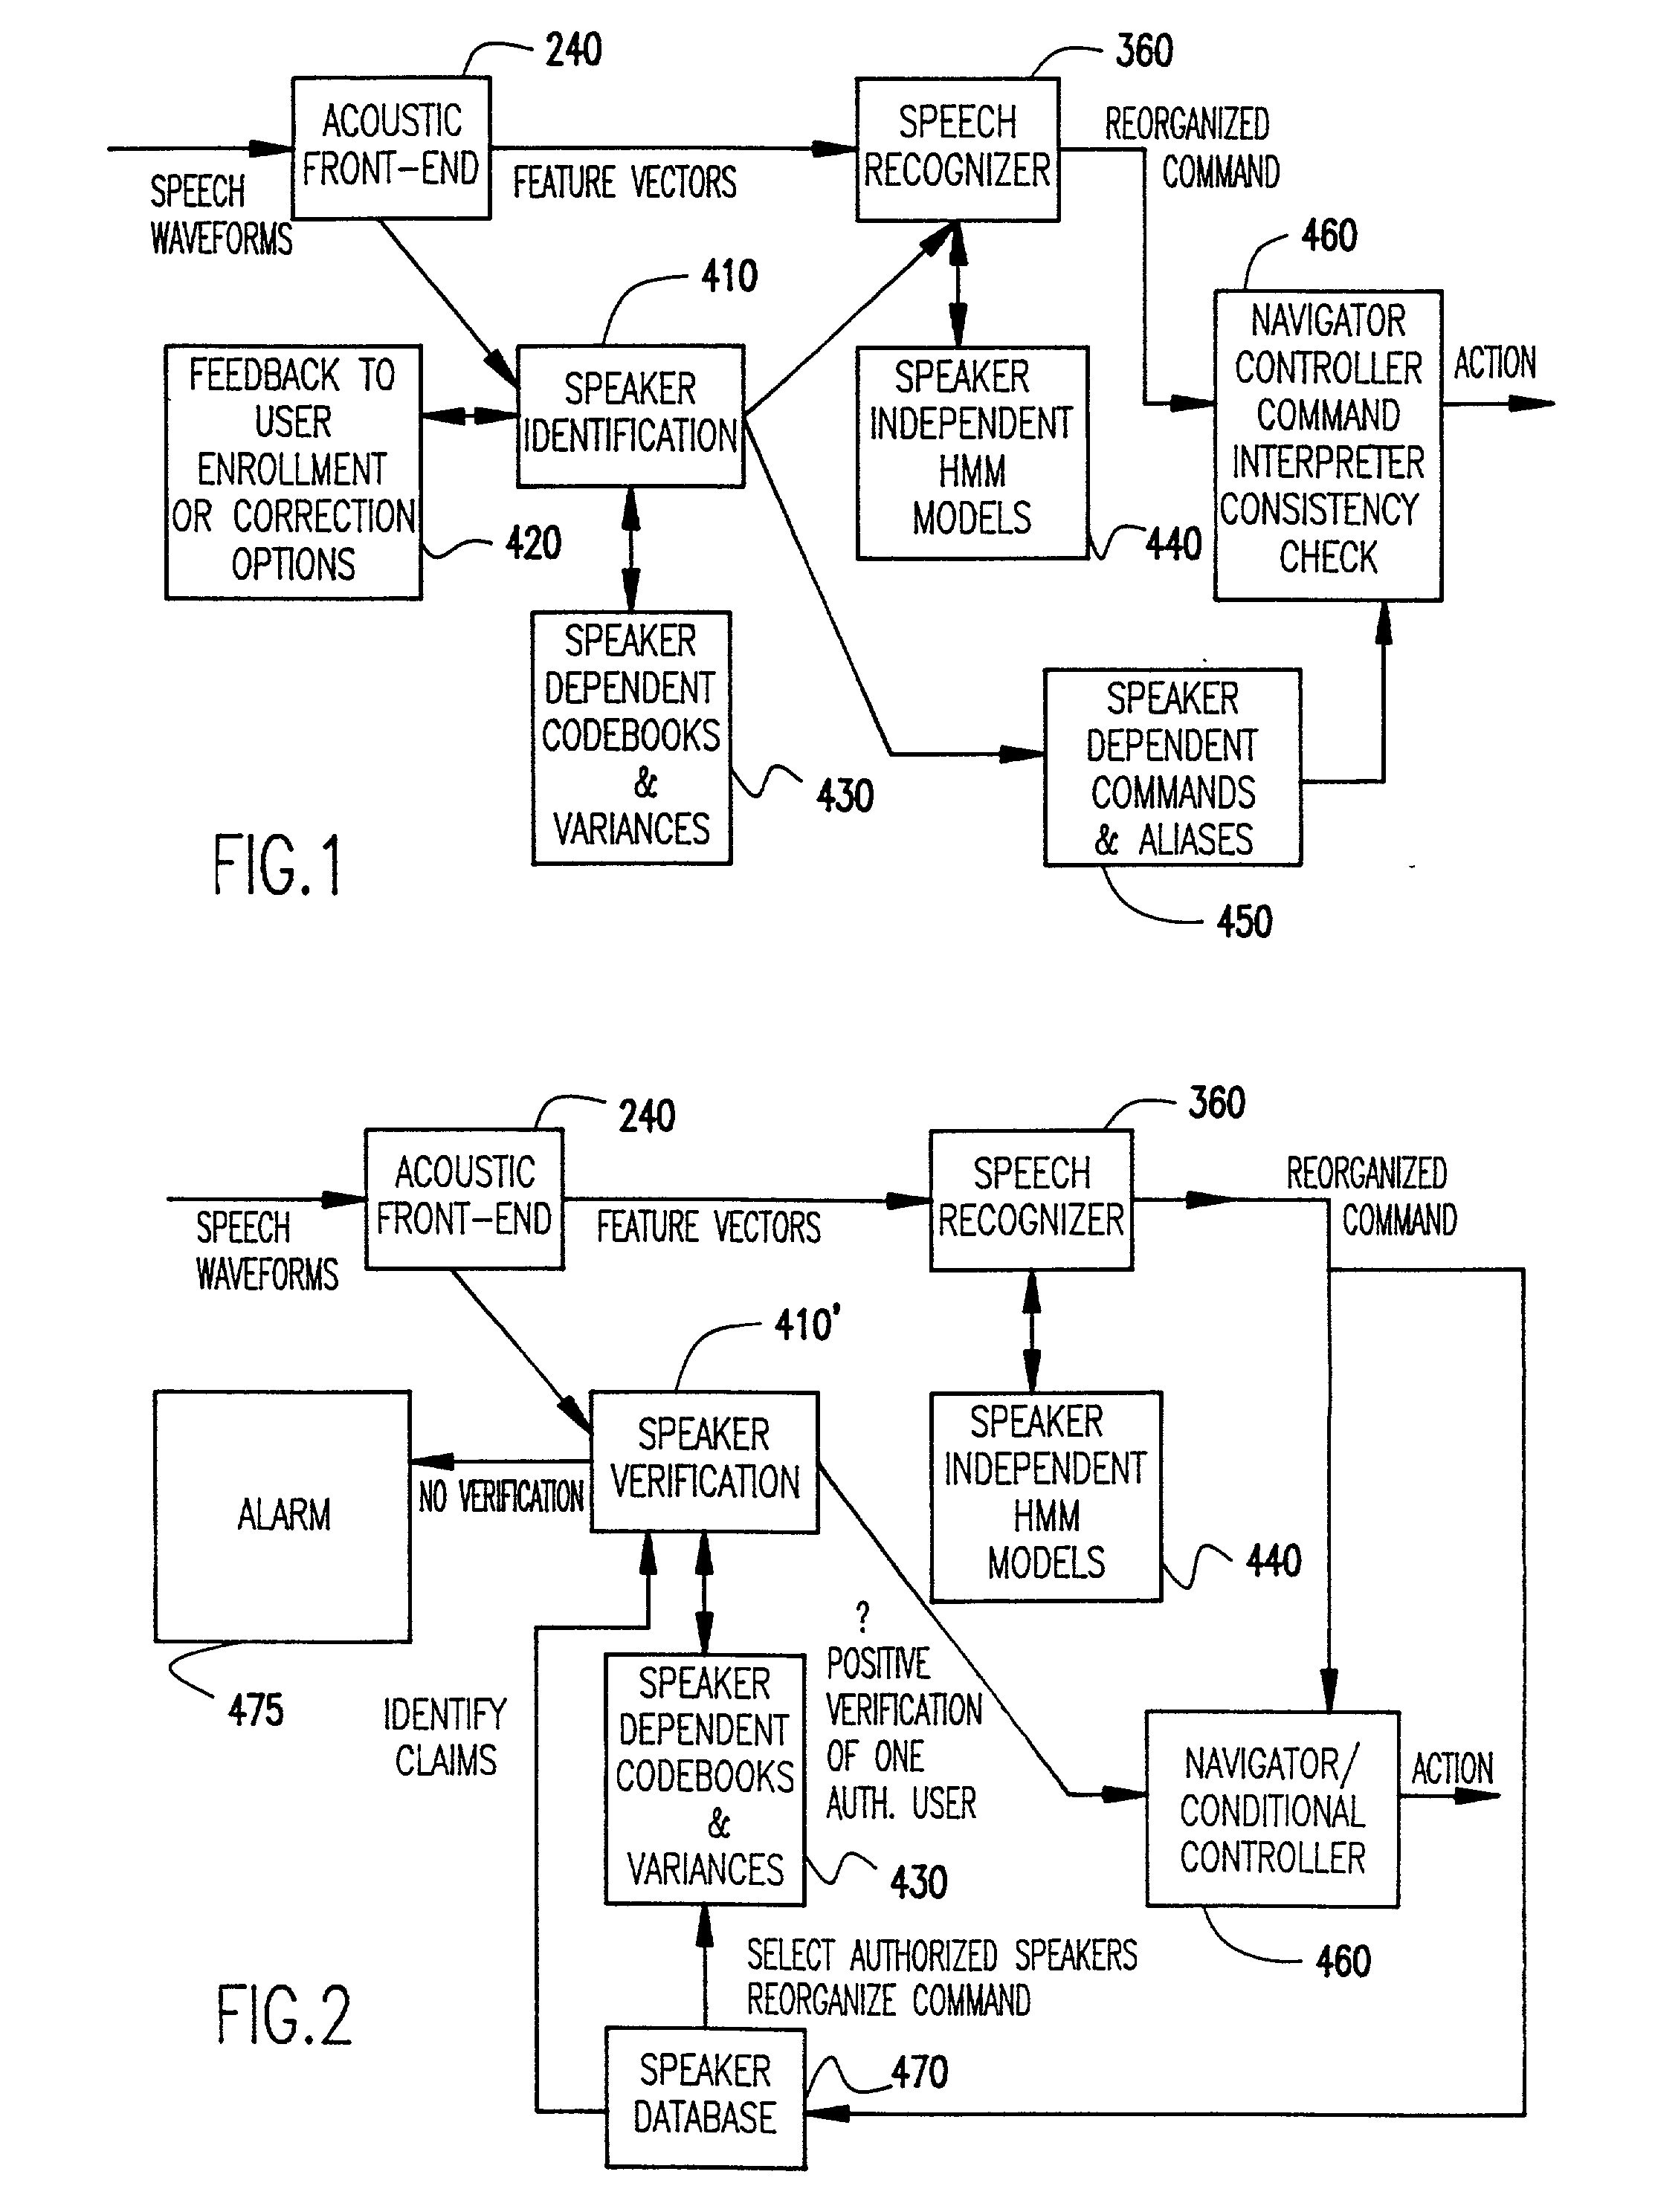 Text independent speaker recognition for transparent command ambiguity resolution and continuous access control